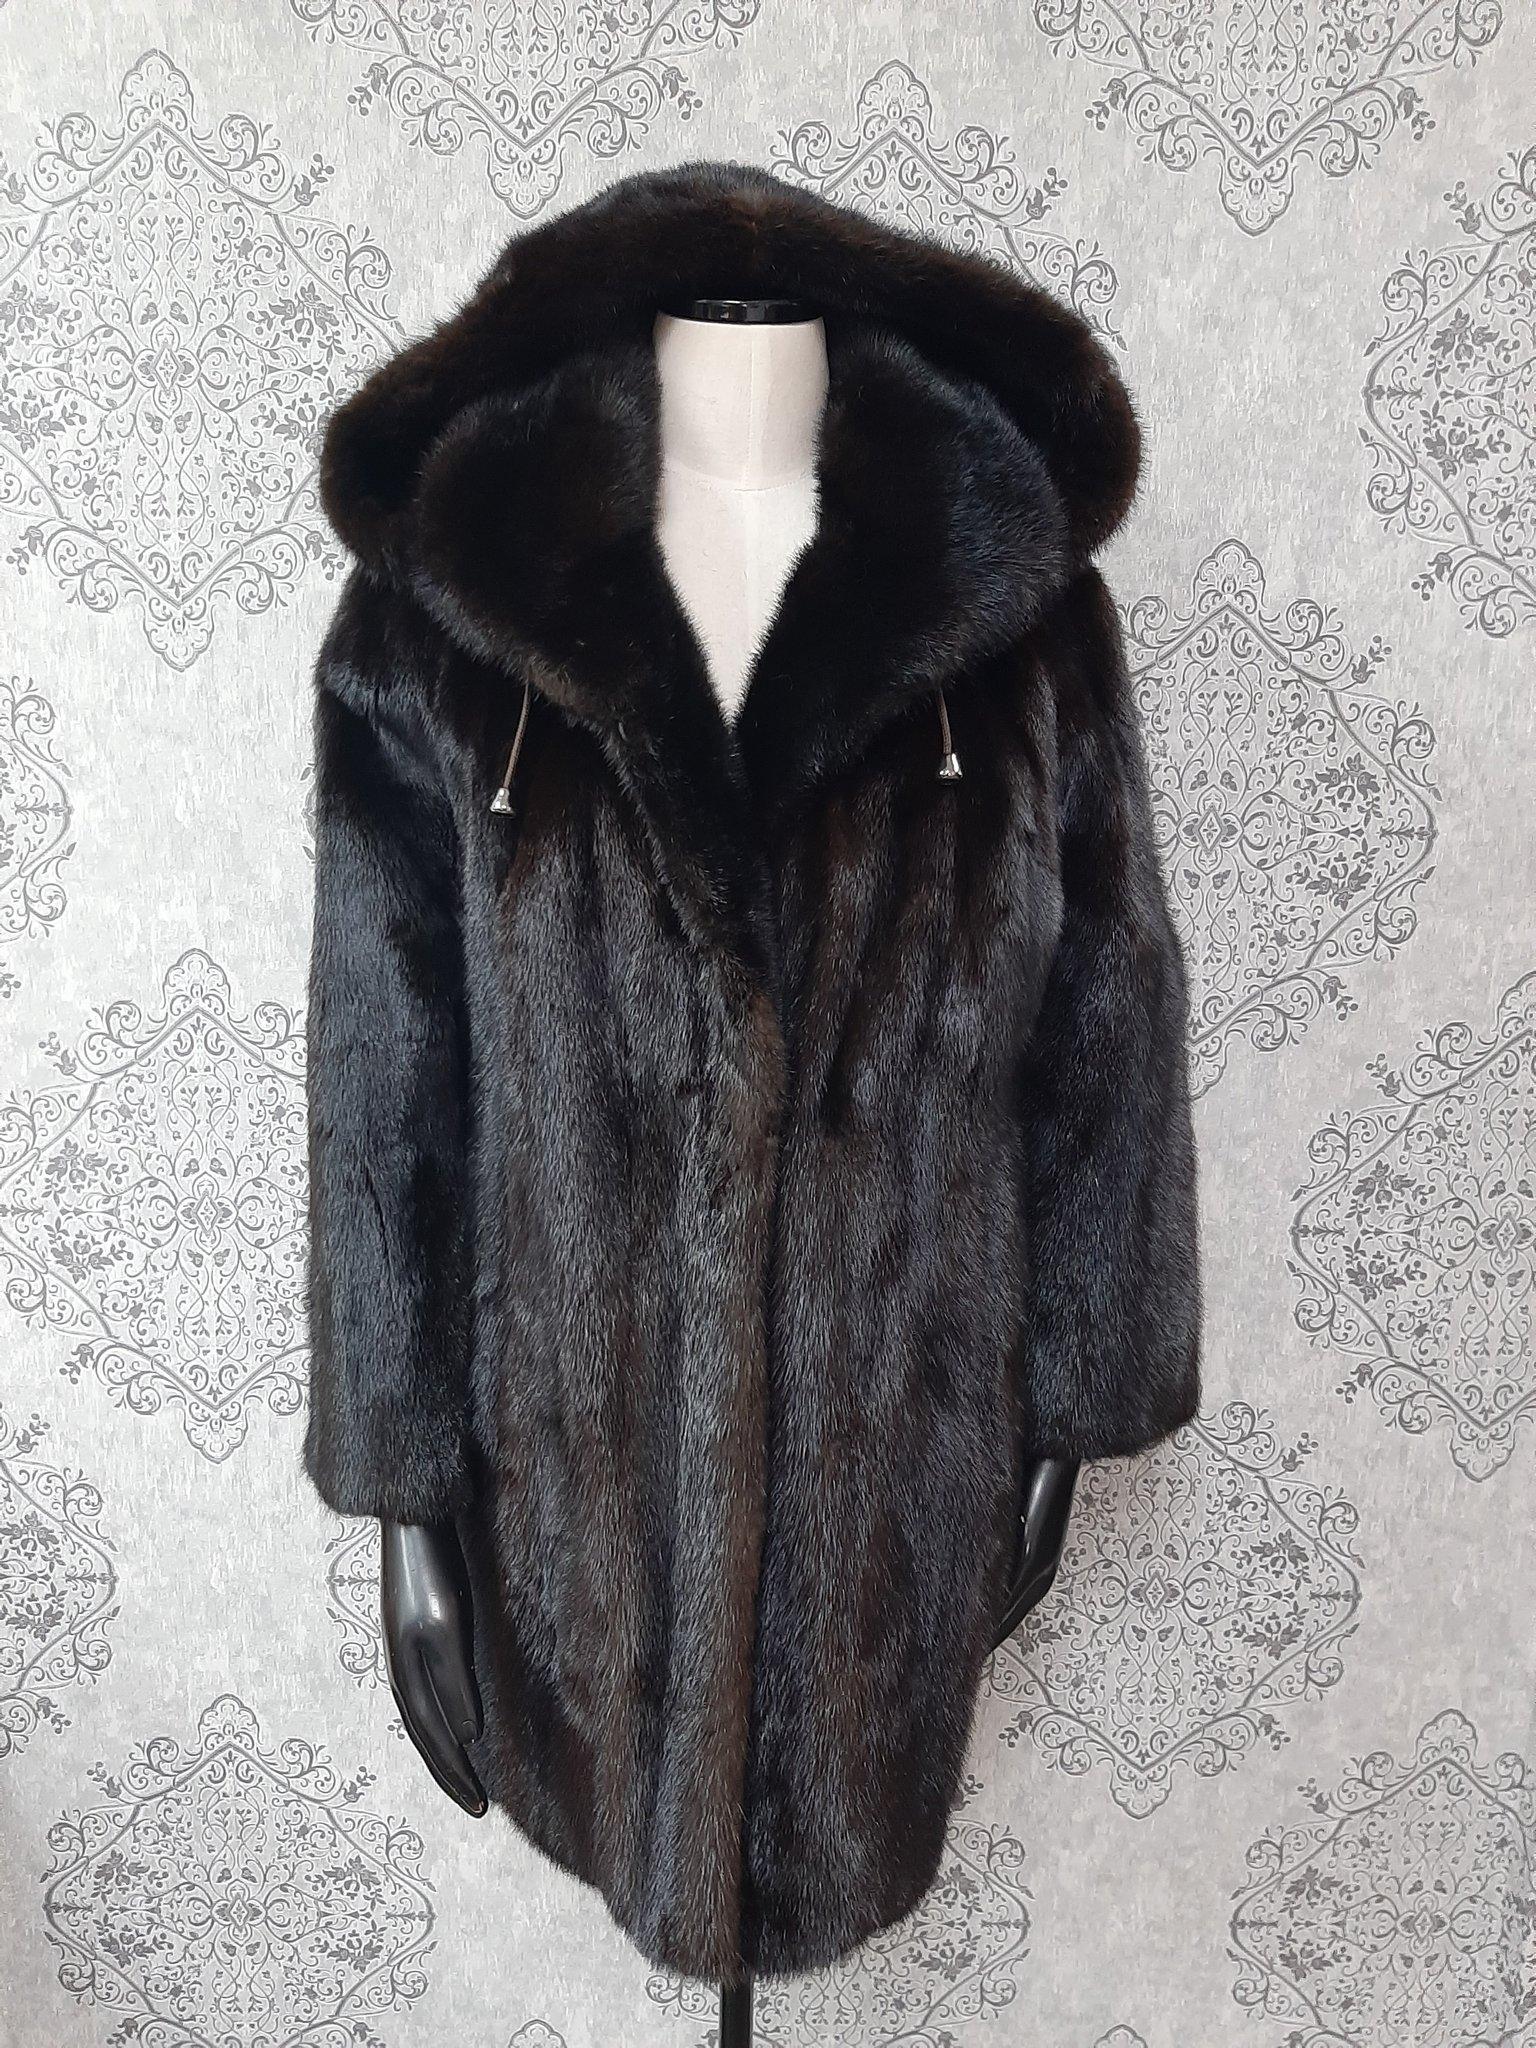 PRODUCT DESCRIPTION:

Brand new luxurious Mink fur coat with a hood

Condition: Brand New

Closure: Buttons

Color: Brown

Material: Mink

Garment type: Coat

Sleeves: straight

Pockets: two pockets

Collar: Short collar

Lining: Shirred Silk